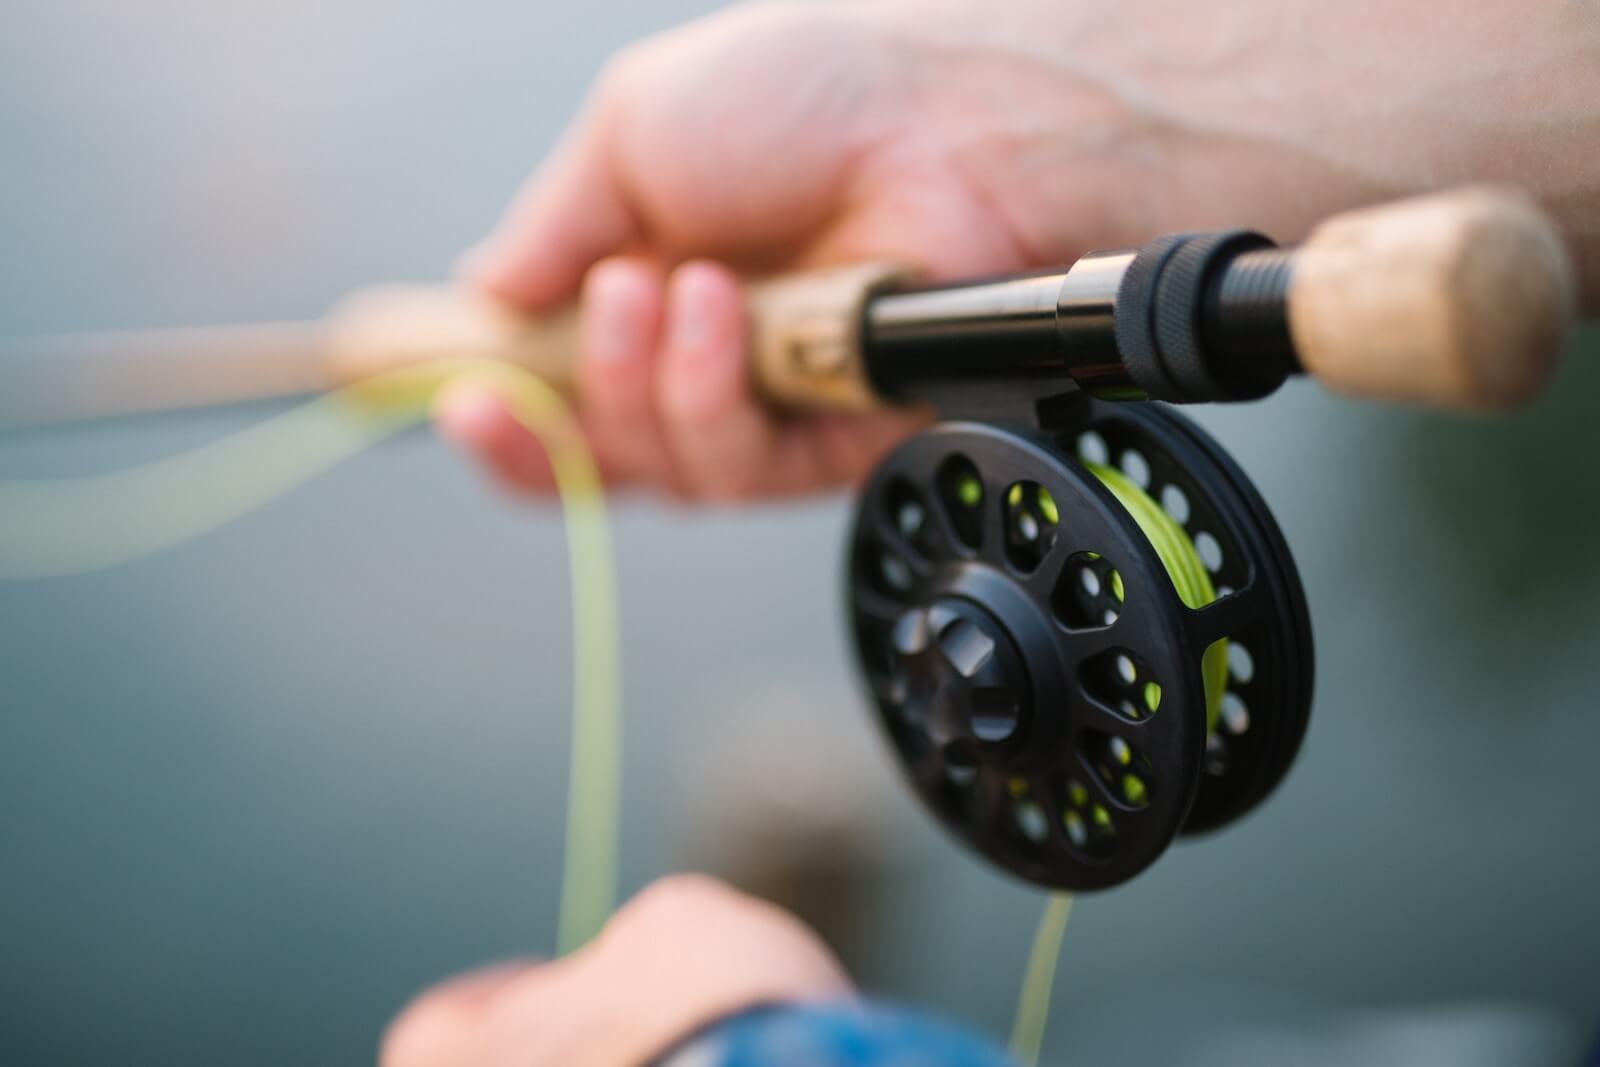 Best Fly Fishing Rods: Top 5 Poles Most Recommended By Experts - Study Finds